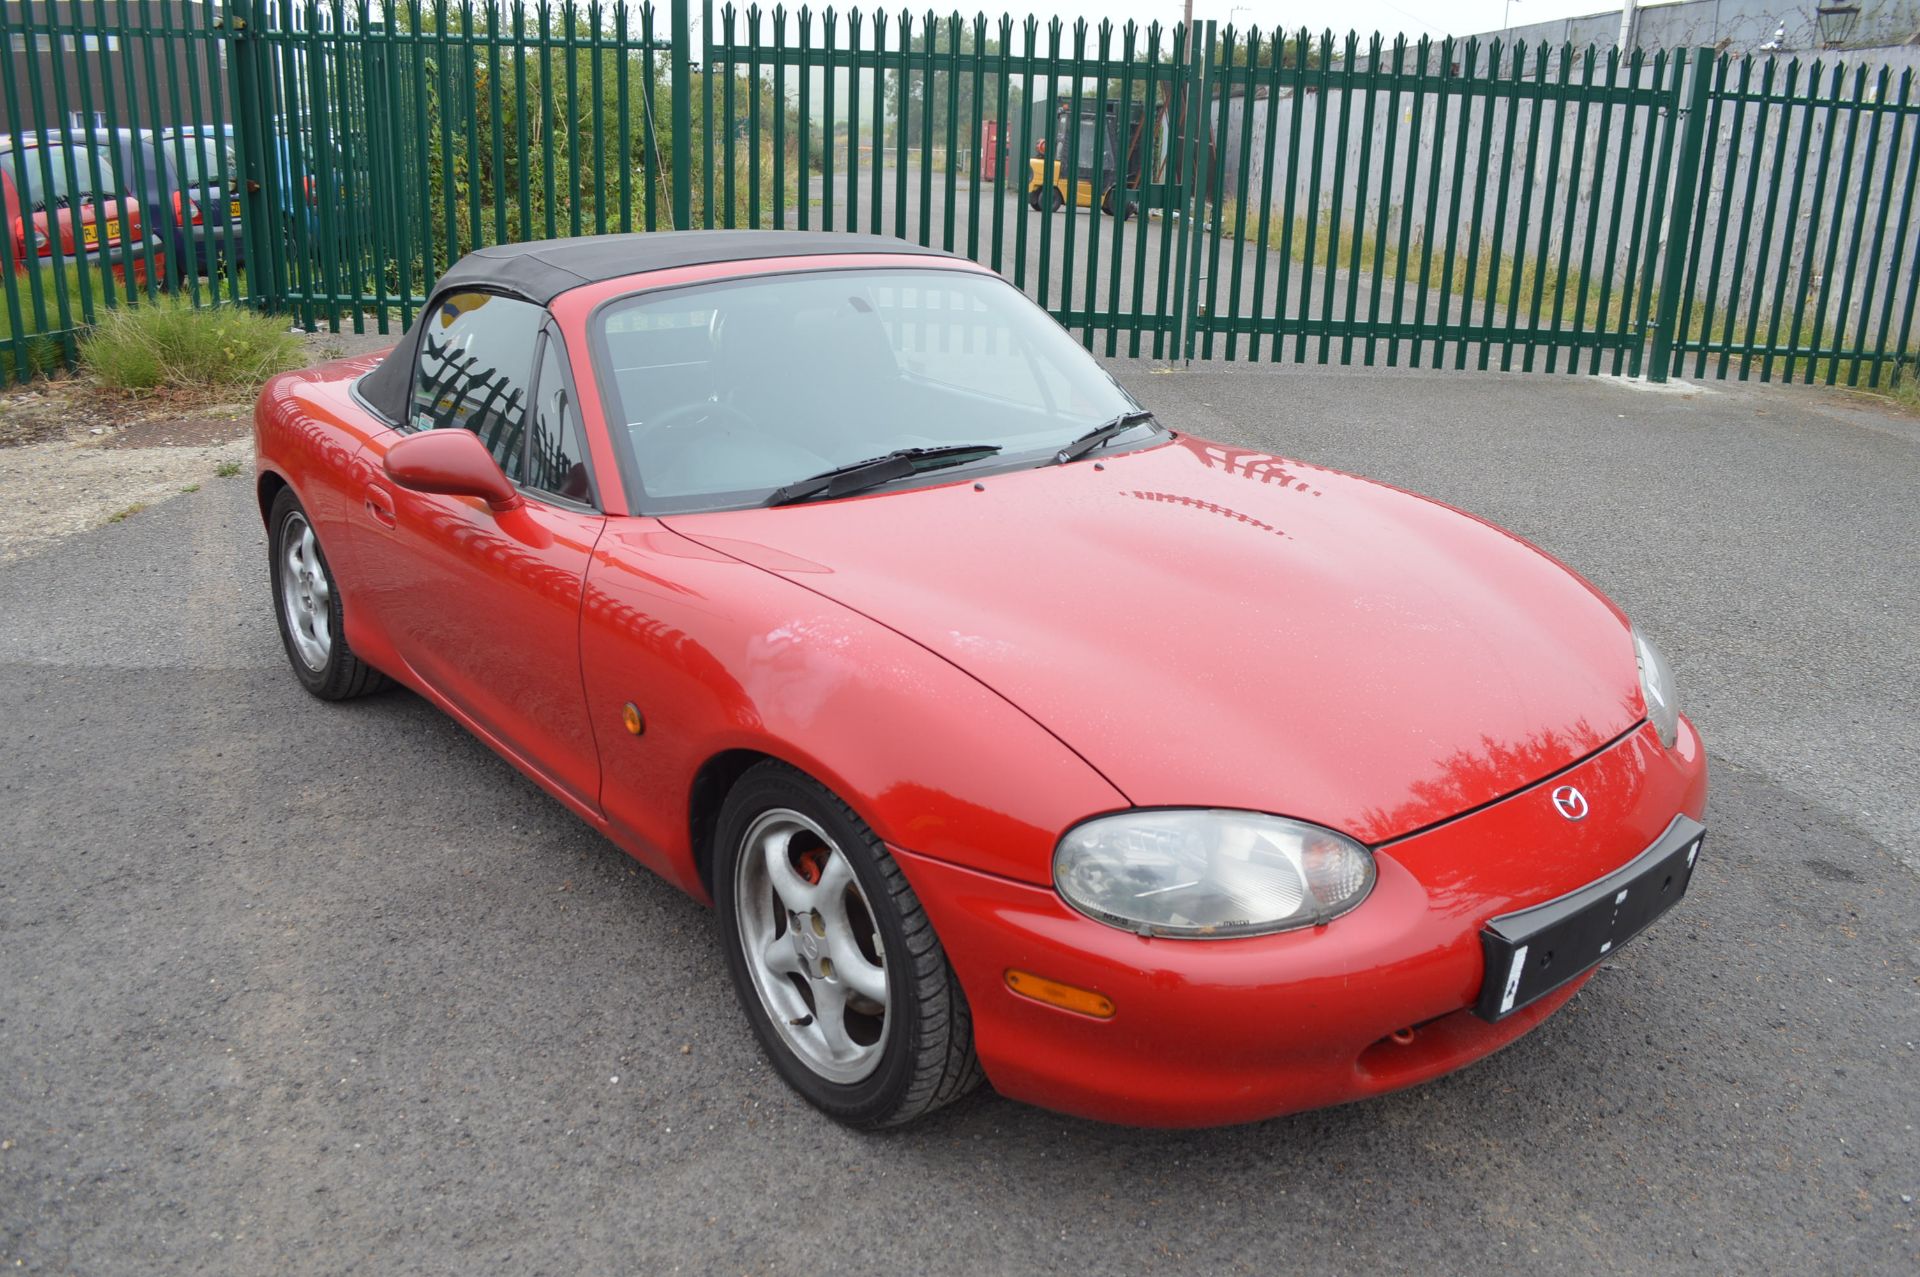 2001/Y REG MAZDA MX-5 1.81 CONVERTIBLE, UPRATED SUSPENSION, BRAKES, INDUCTION,